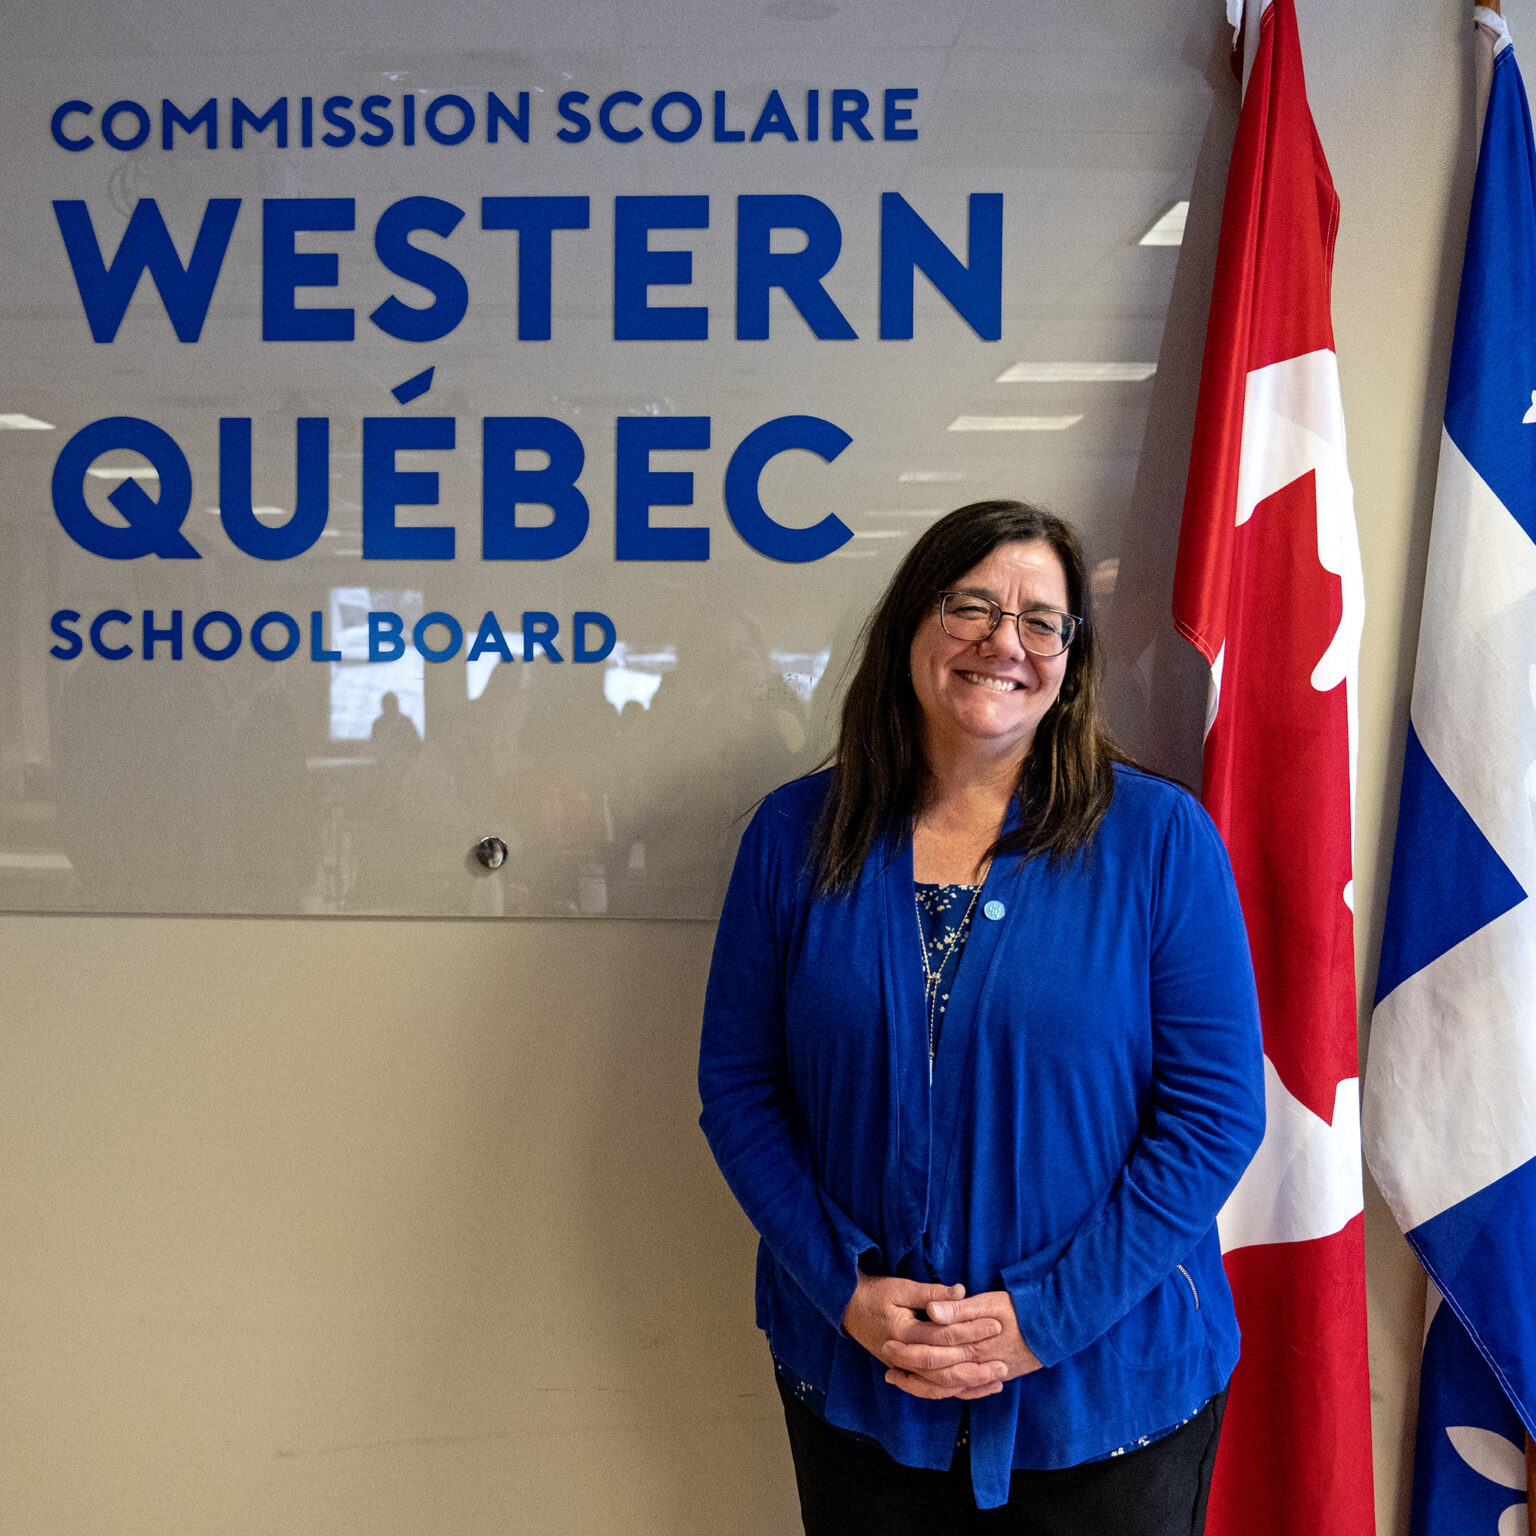 The WQSB is Coming to a Career Fair Near You! Western Québec School Board